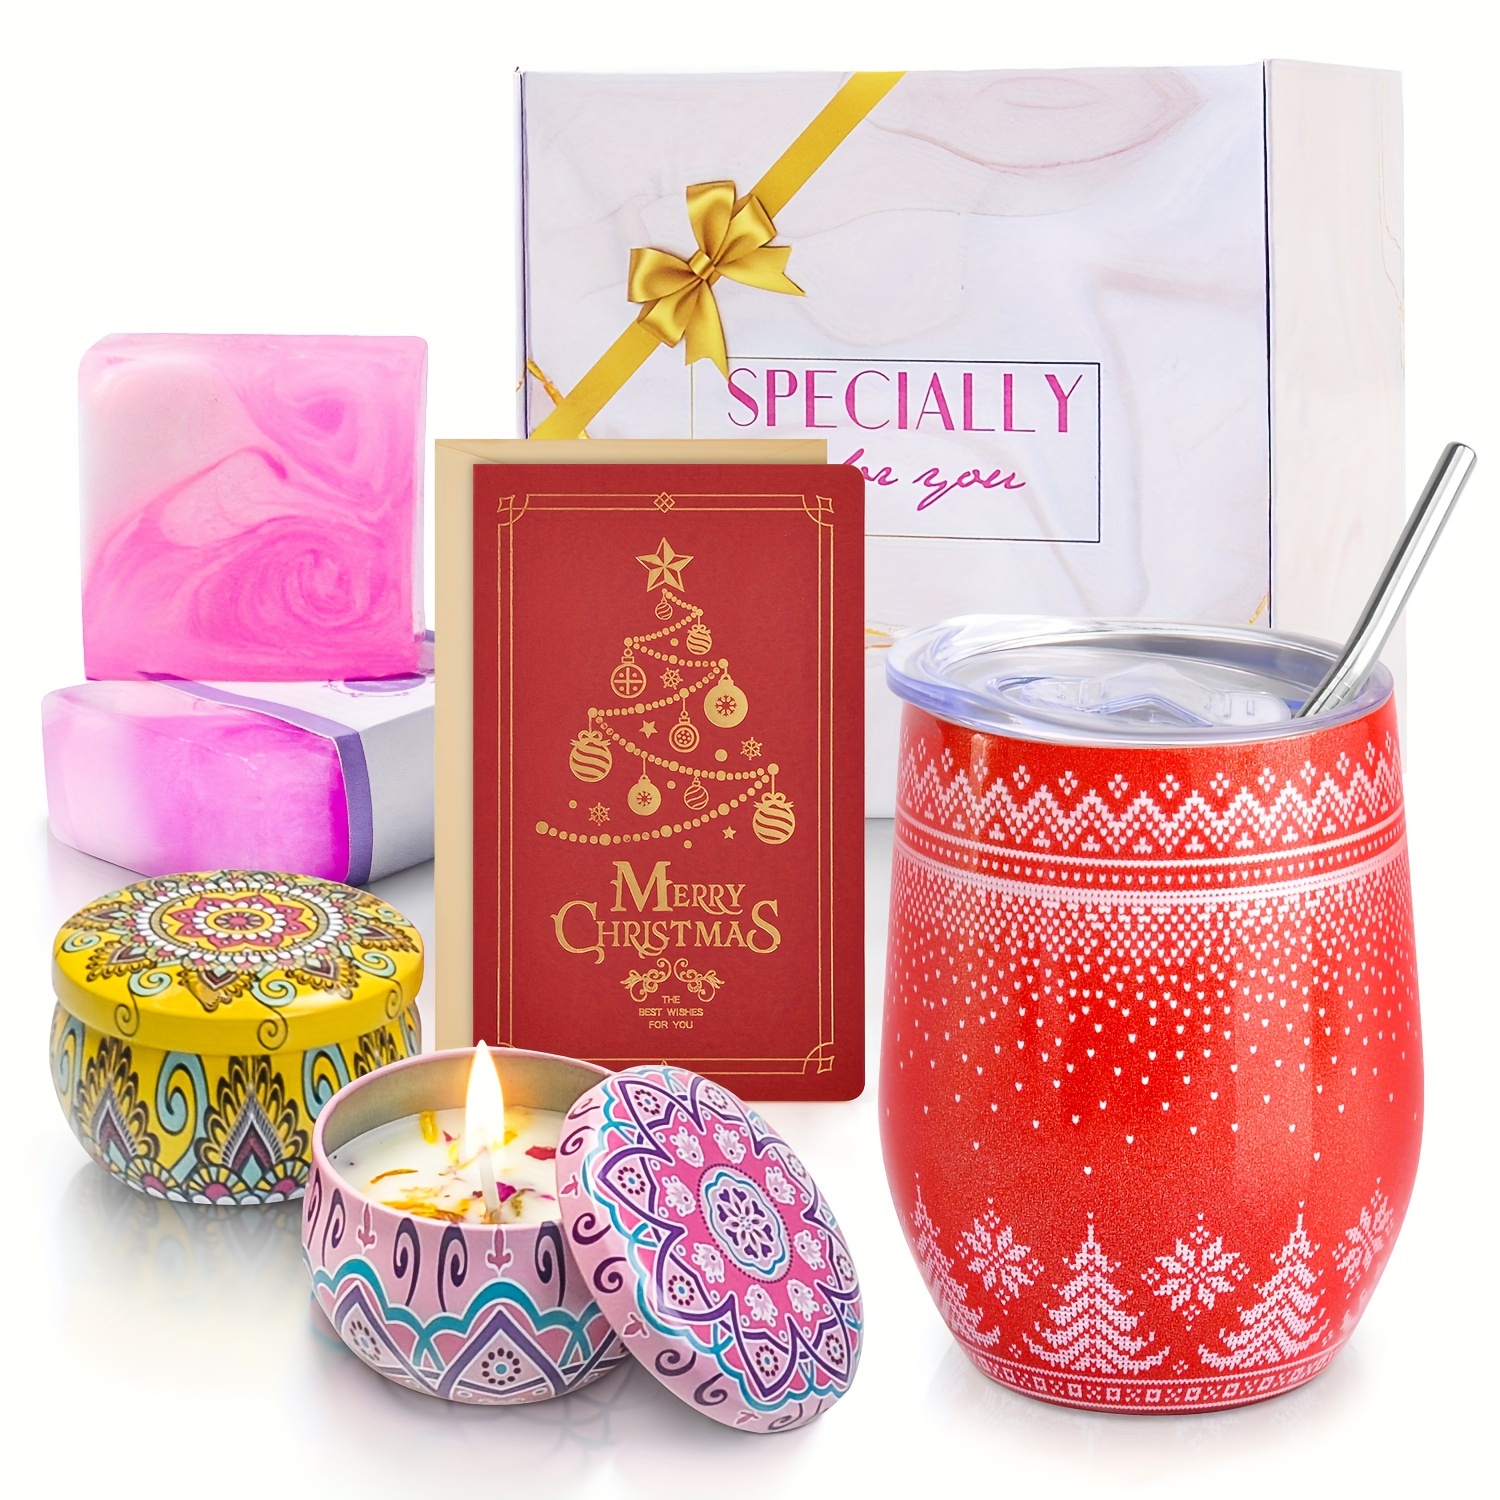 Christmas Gifts for Women, Christmas Gift Ideas, Birthday and Christmas Gift Baskets for Her, Wife, Mom, and Sister Red